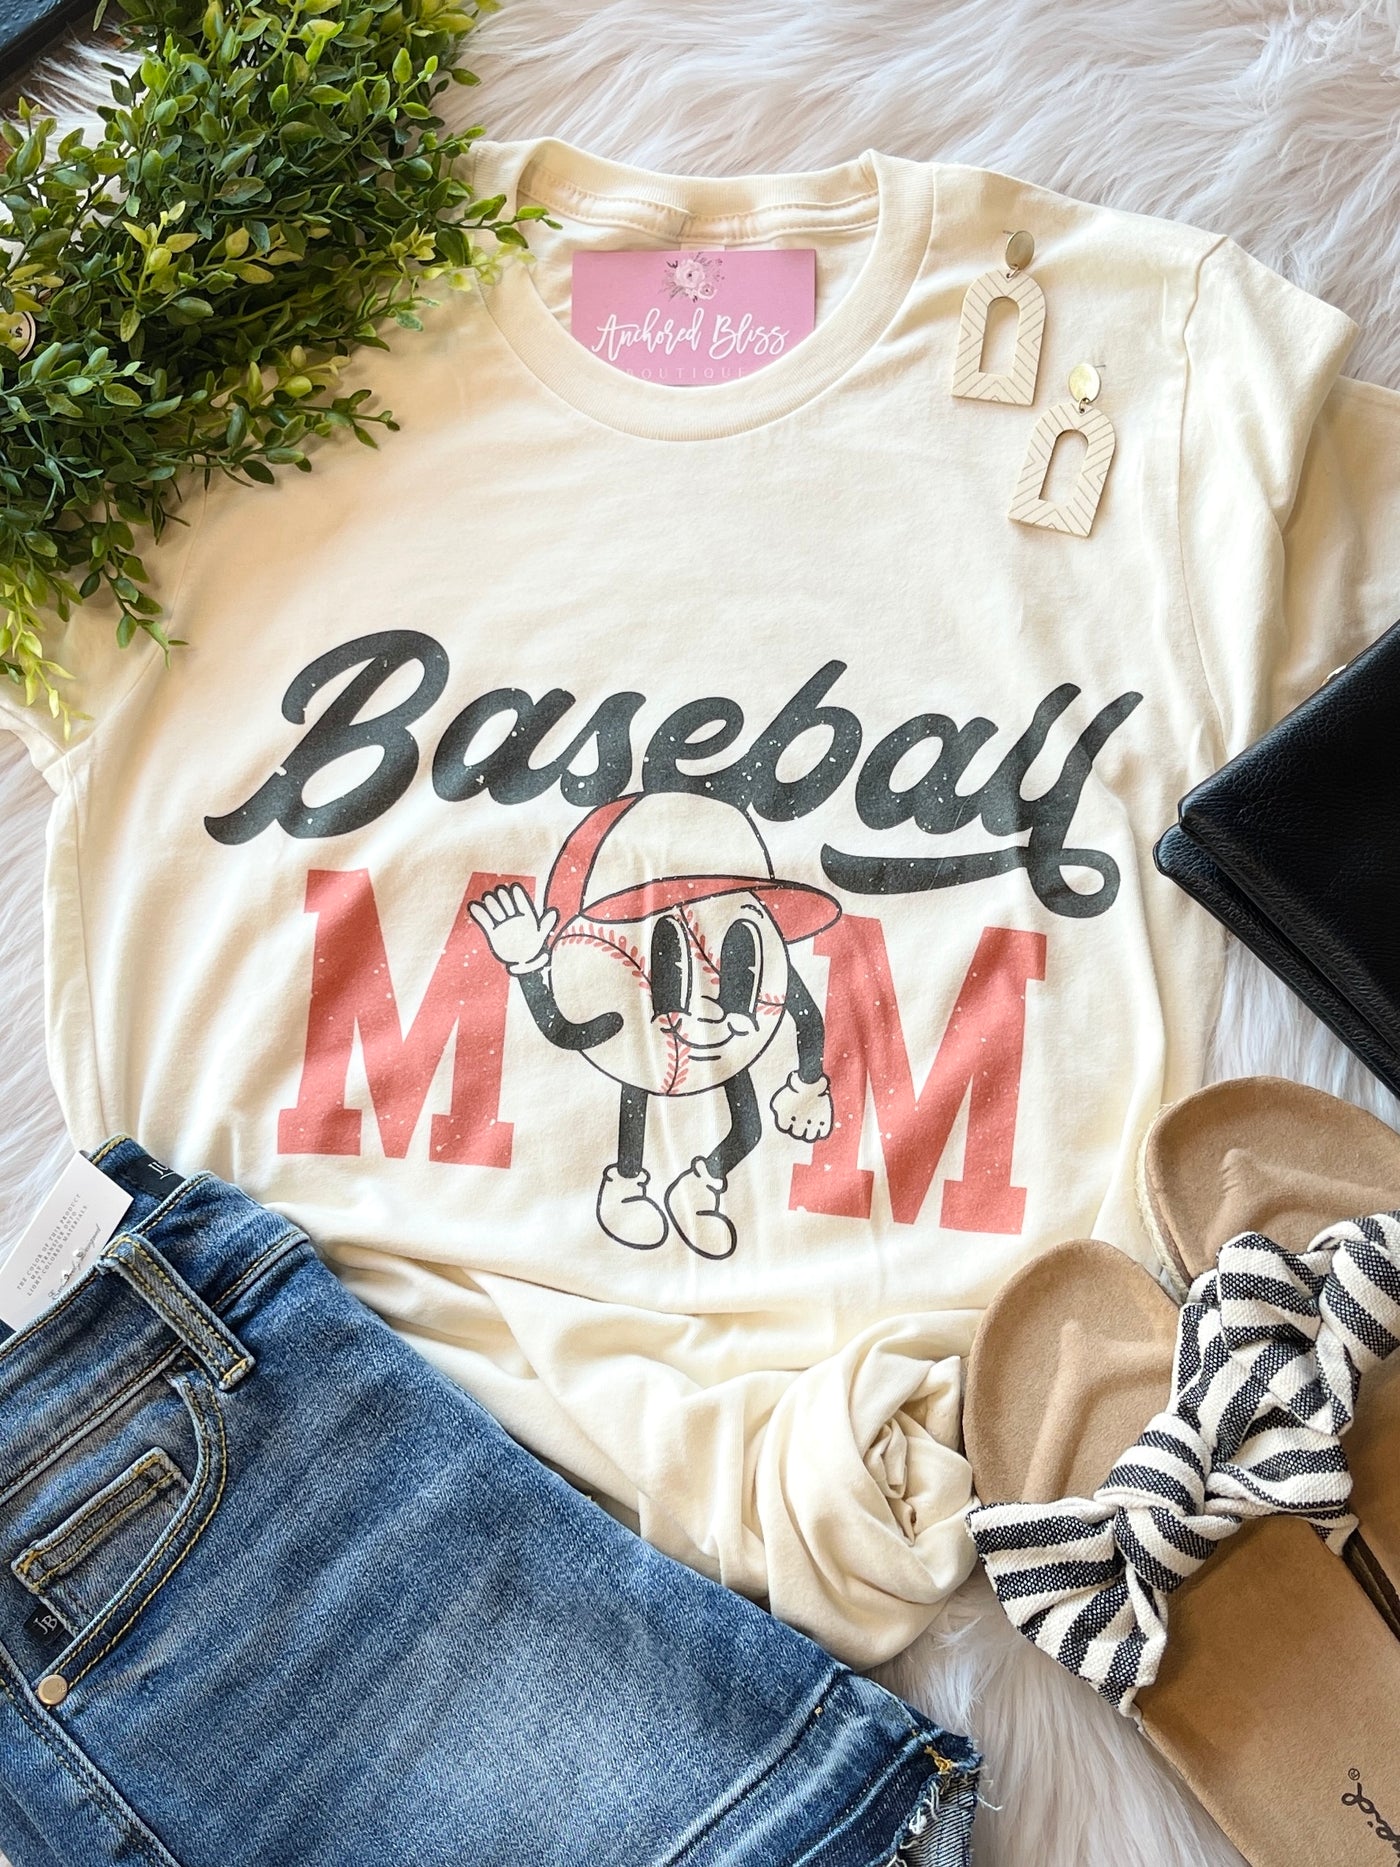 Baseball Mom Graphic Tee-Harps & Oli-Shop Anchored Bliss Women's Boutique Clothing Store